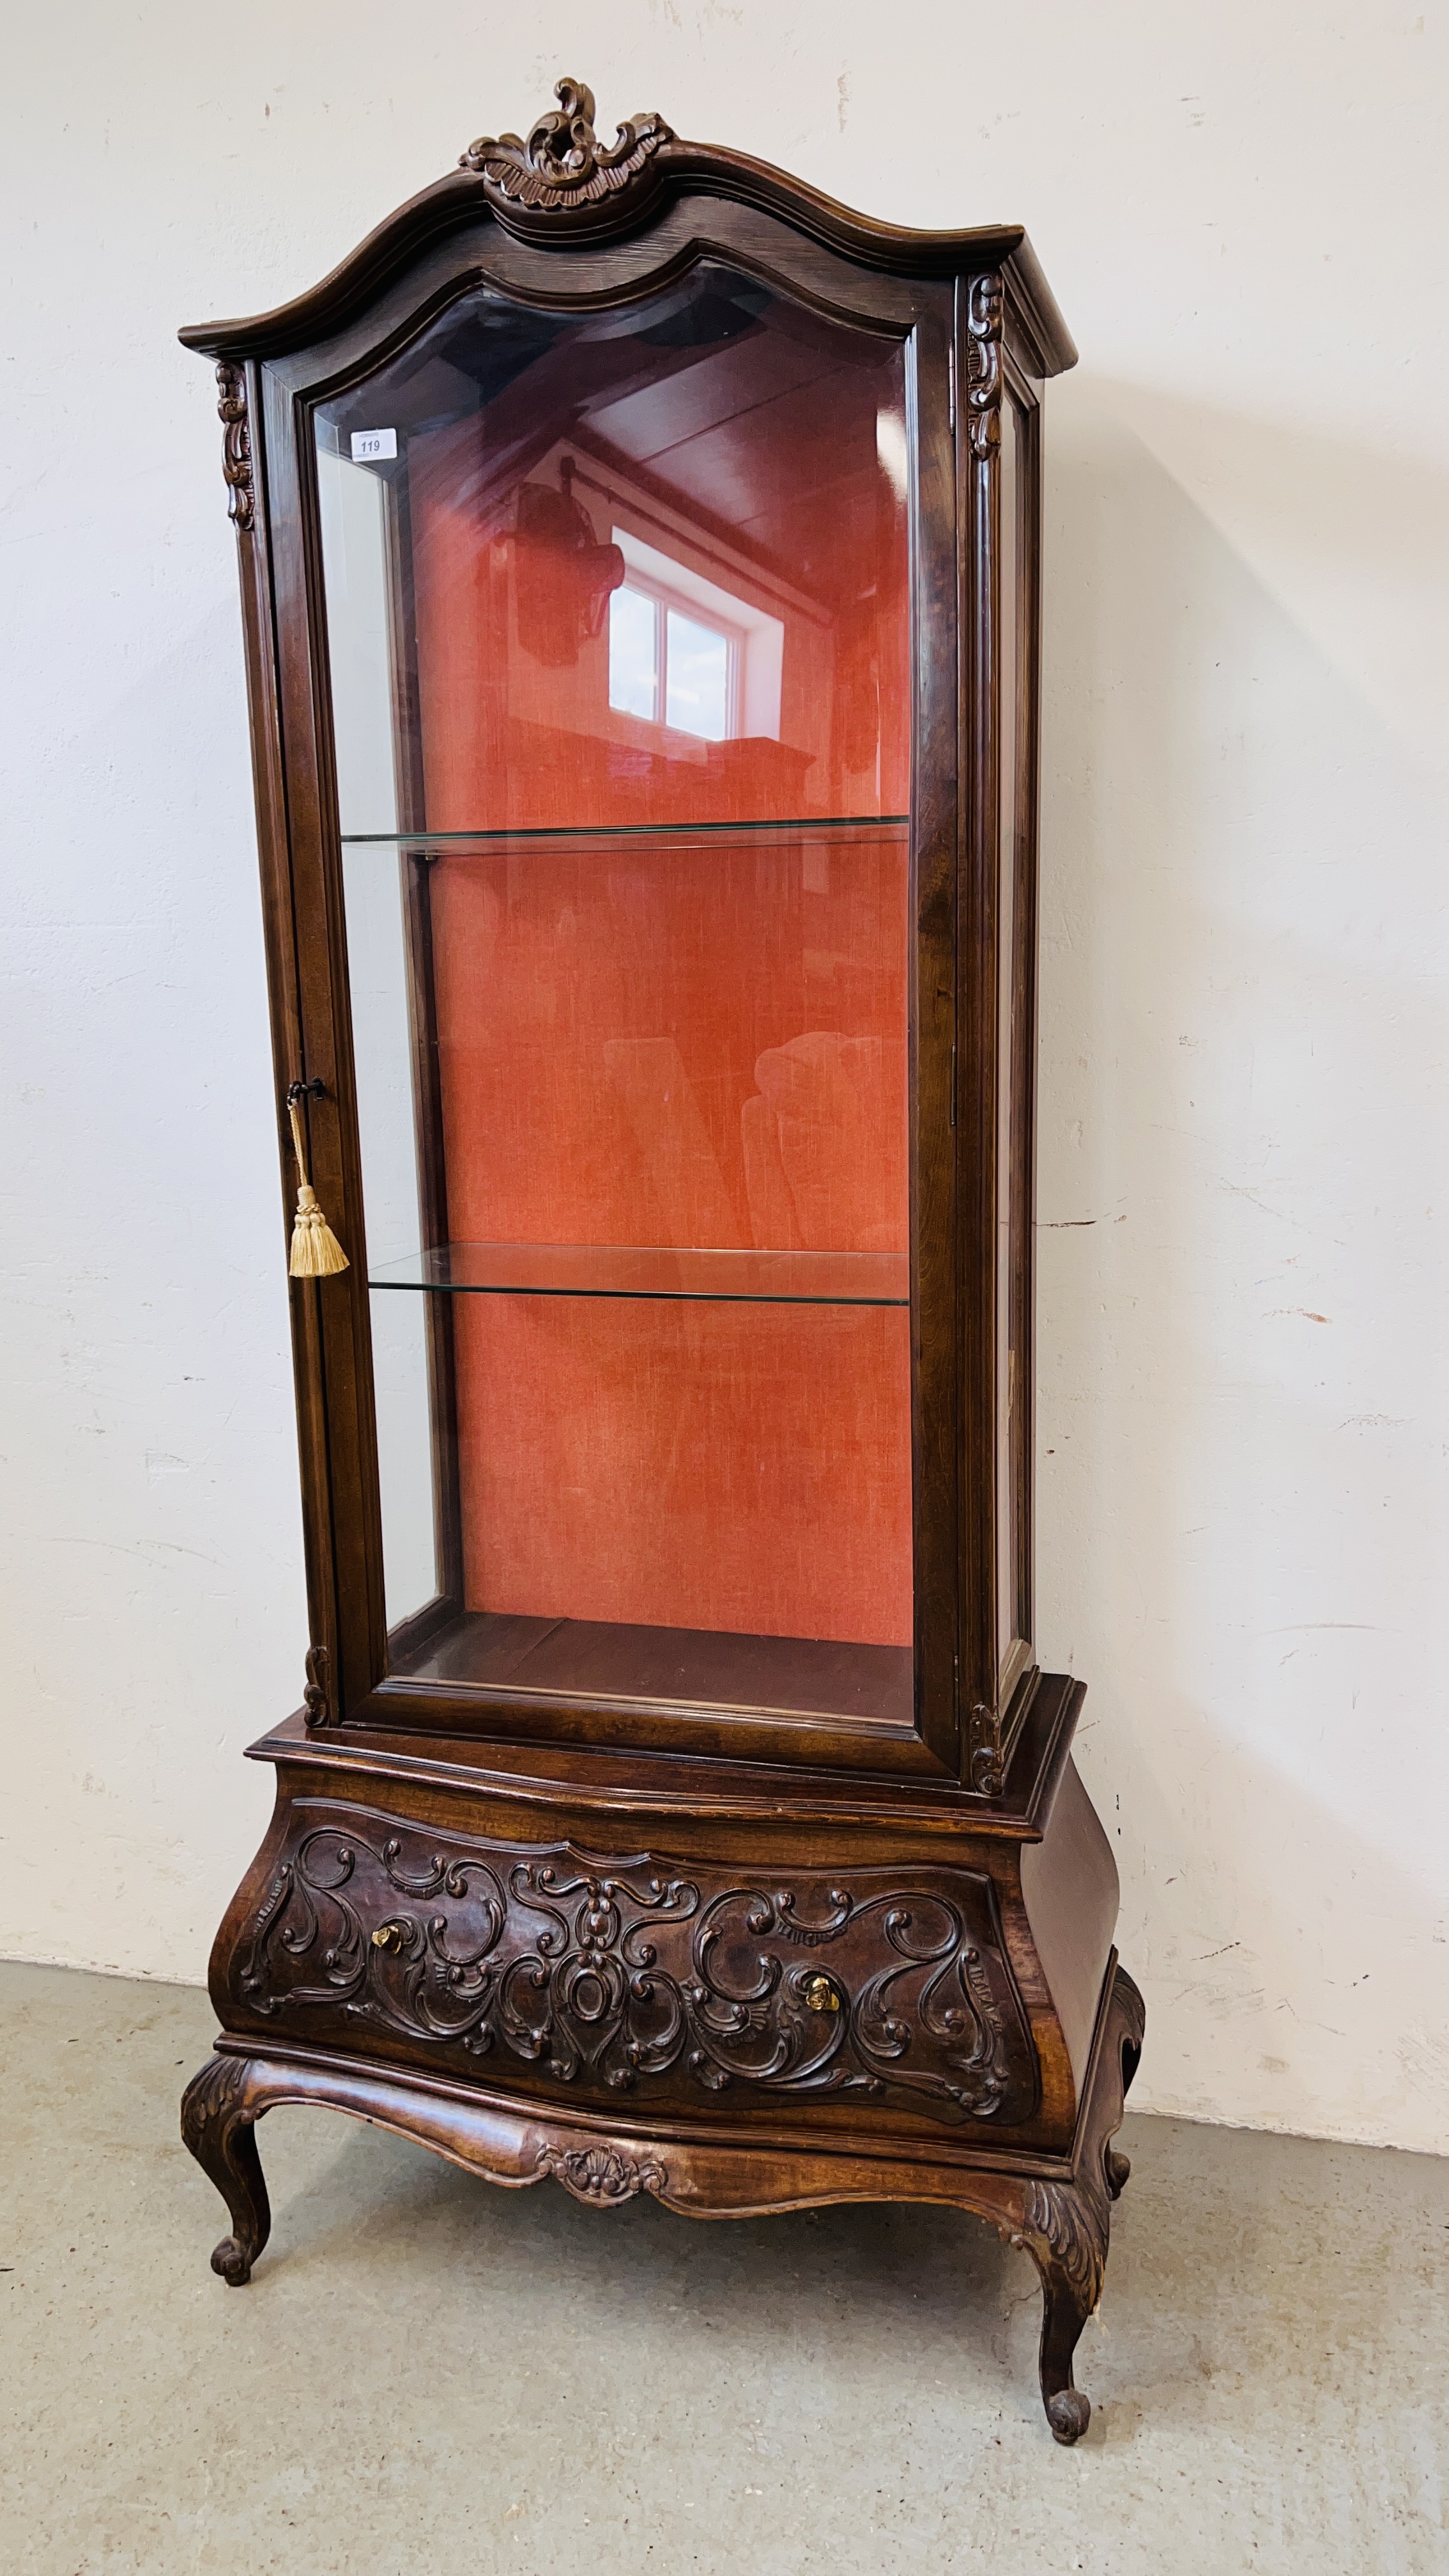 A REPRODUCTION CONTINENTAL STYLE DISPLAY CABINET WITH DRAWER TO BASE - W 83CM. D 41CM. H 183CM.